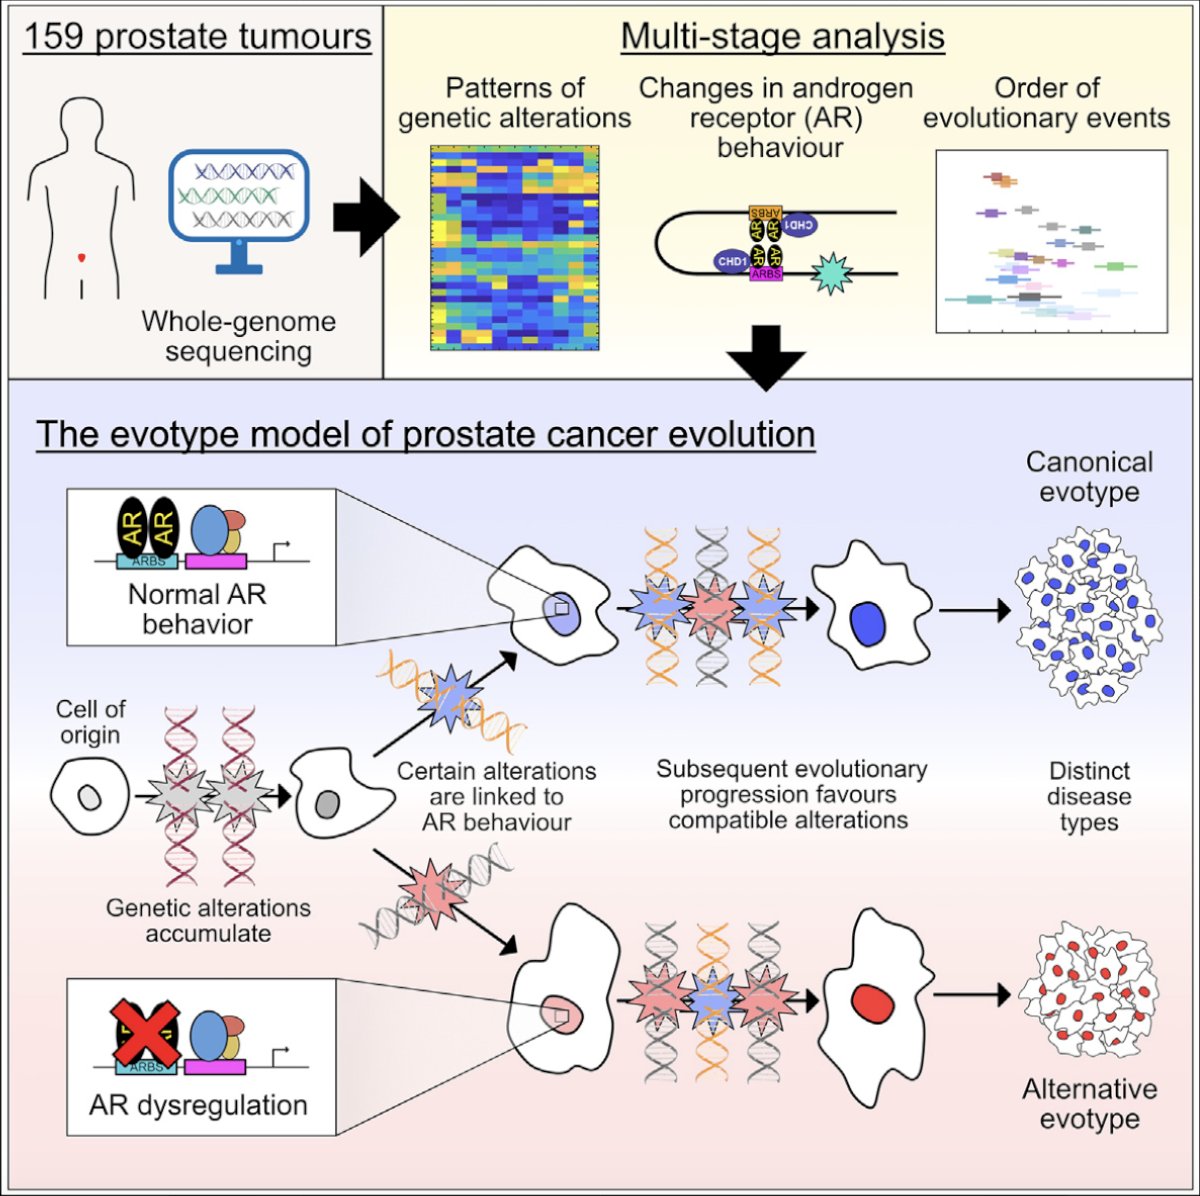 They found that integrating the results revealed two distinct types of prostate cancer that arise from divergent evolutionary trajectories